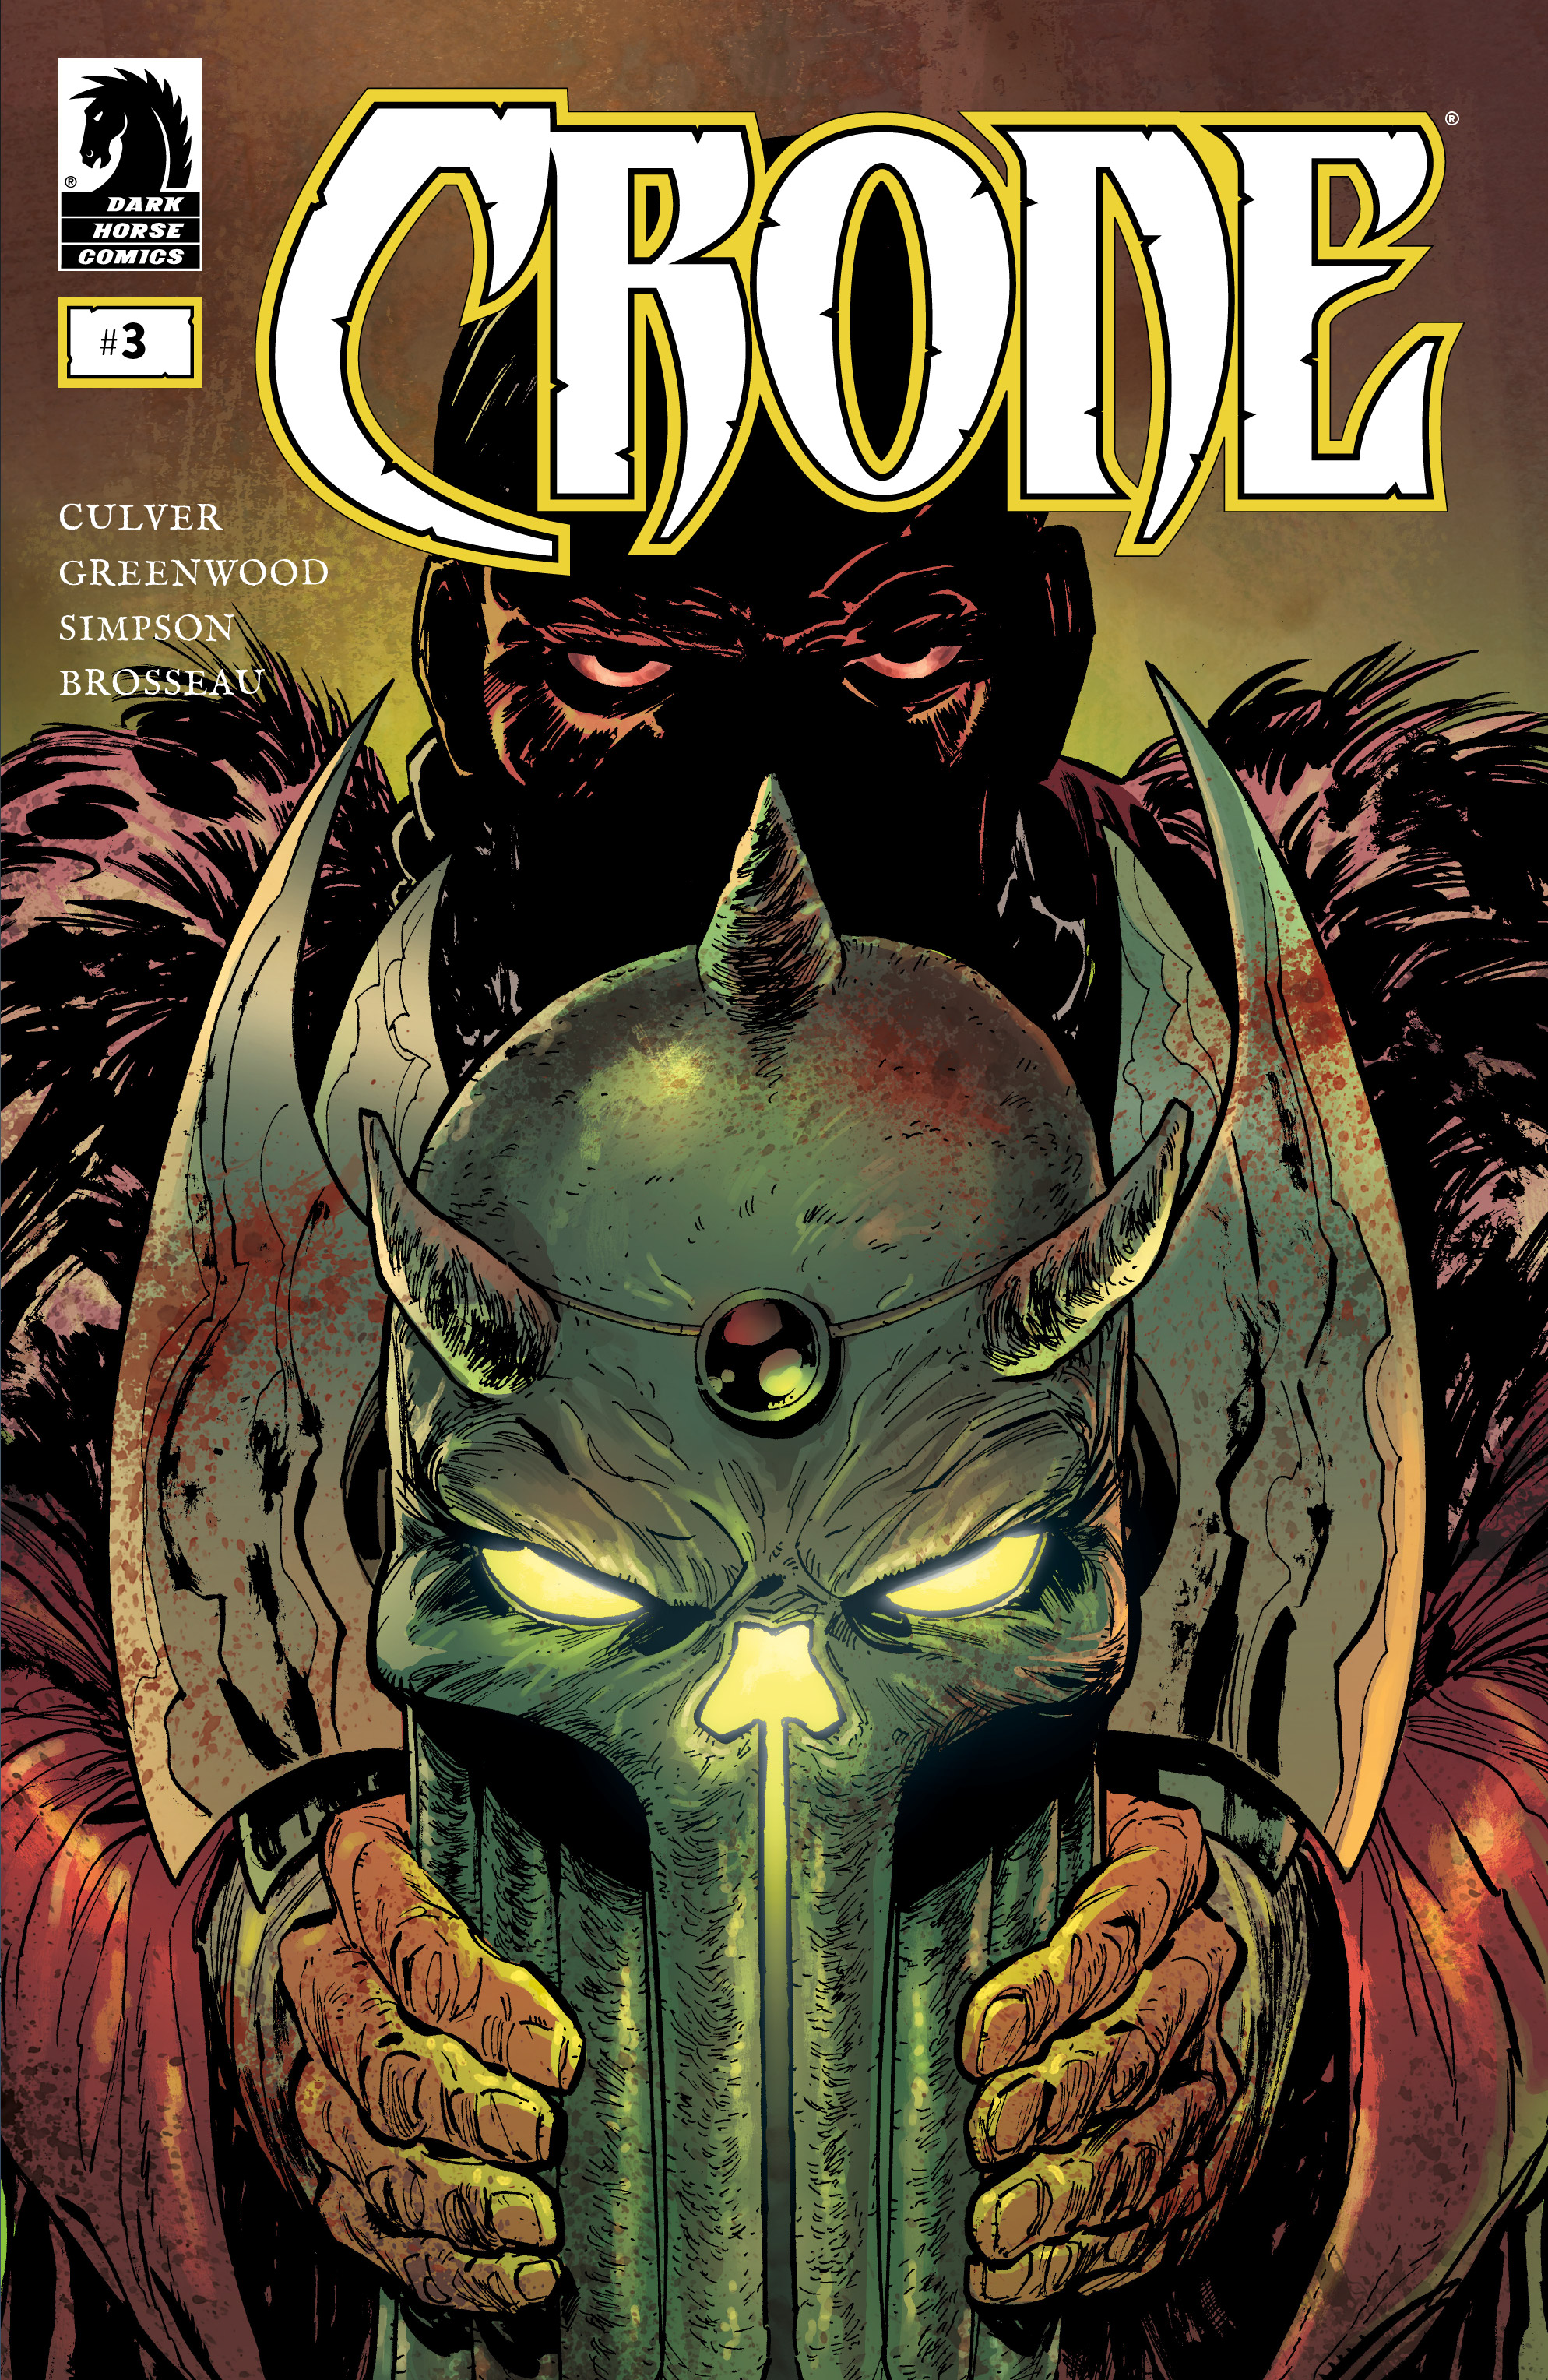 Read online Crone comic -  Issue #3 - 1